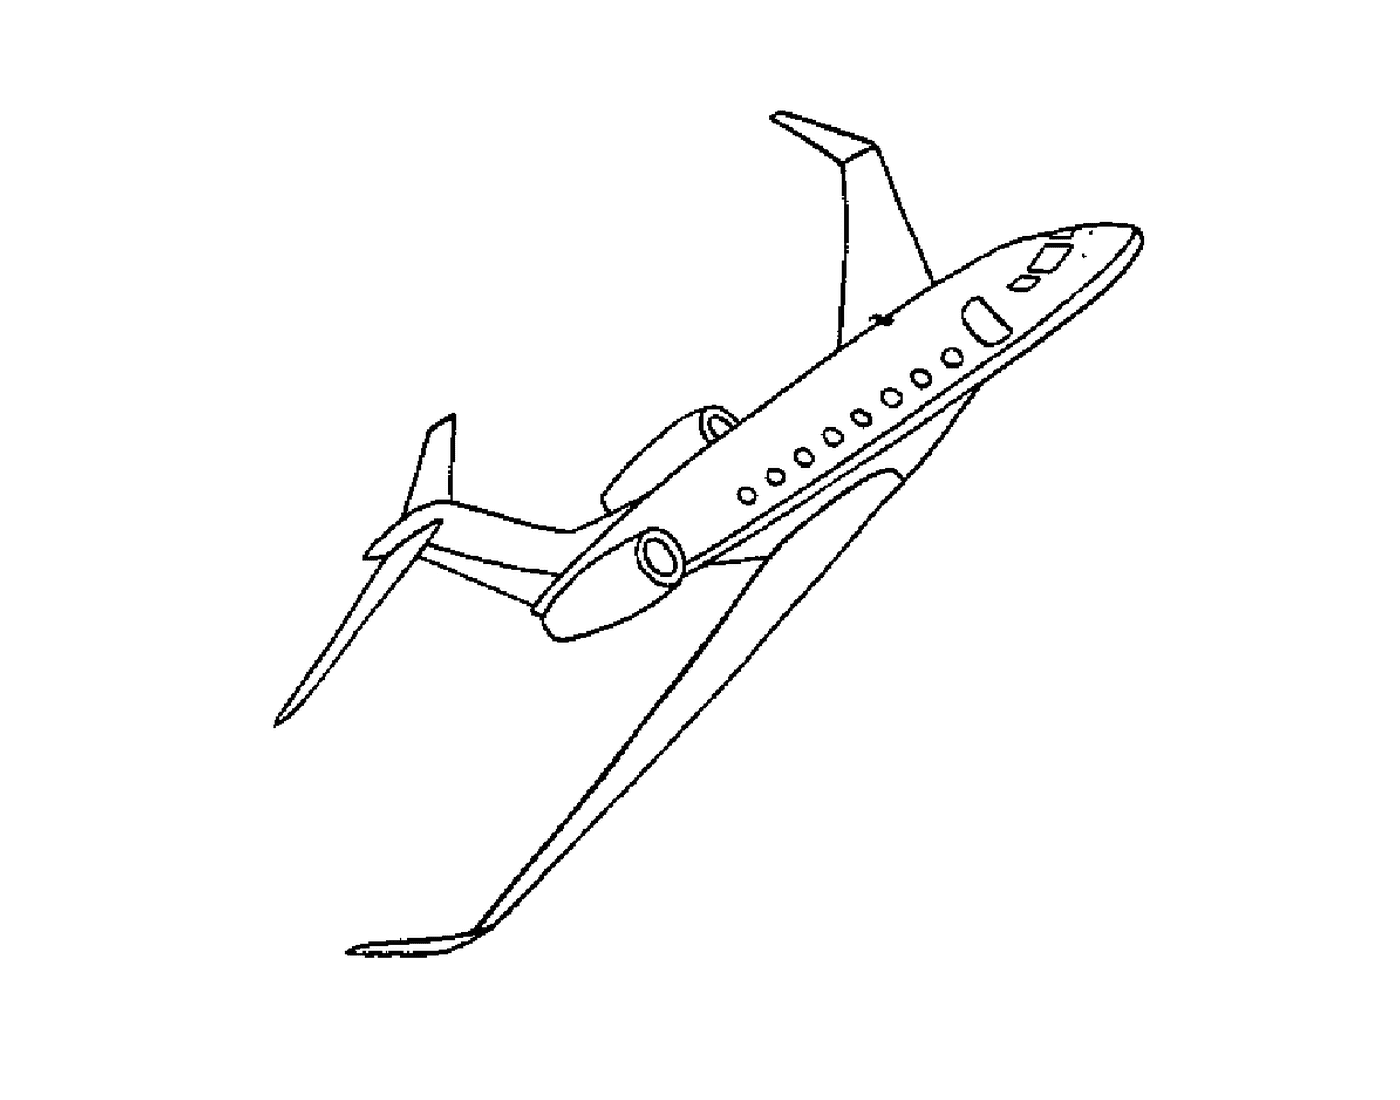  A plane flying 